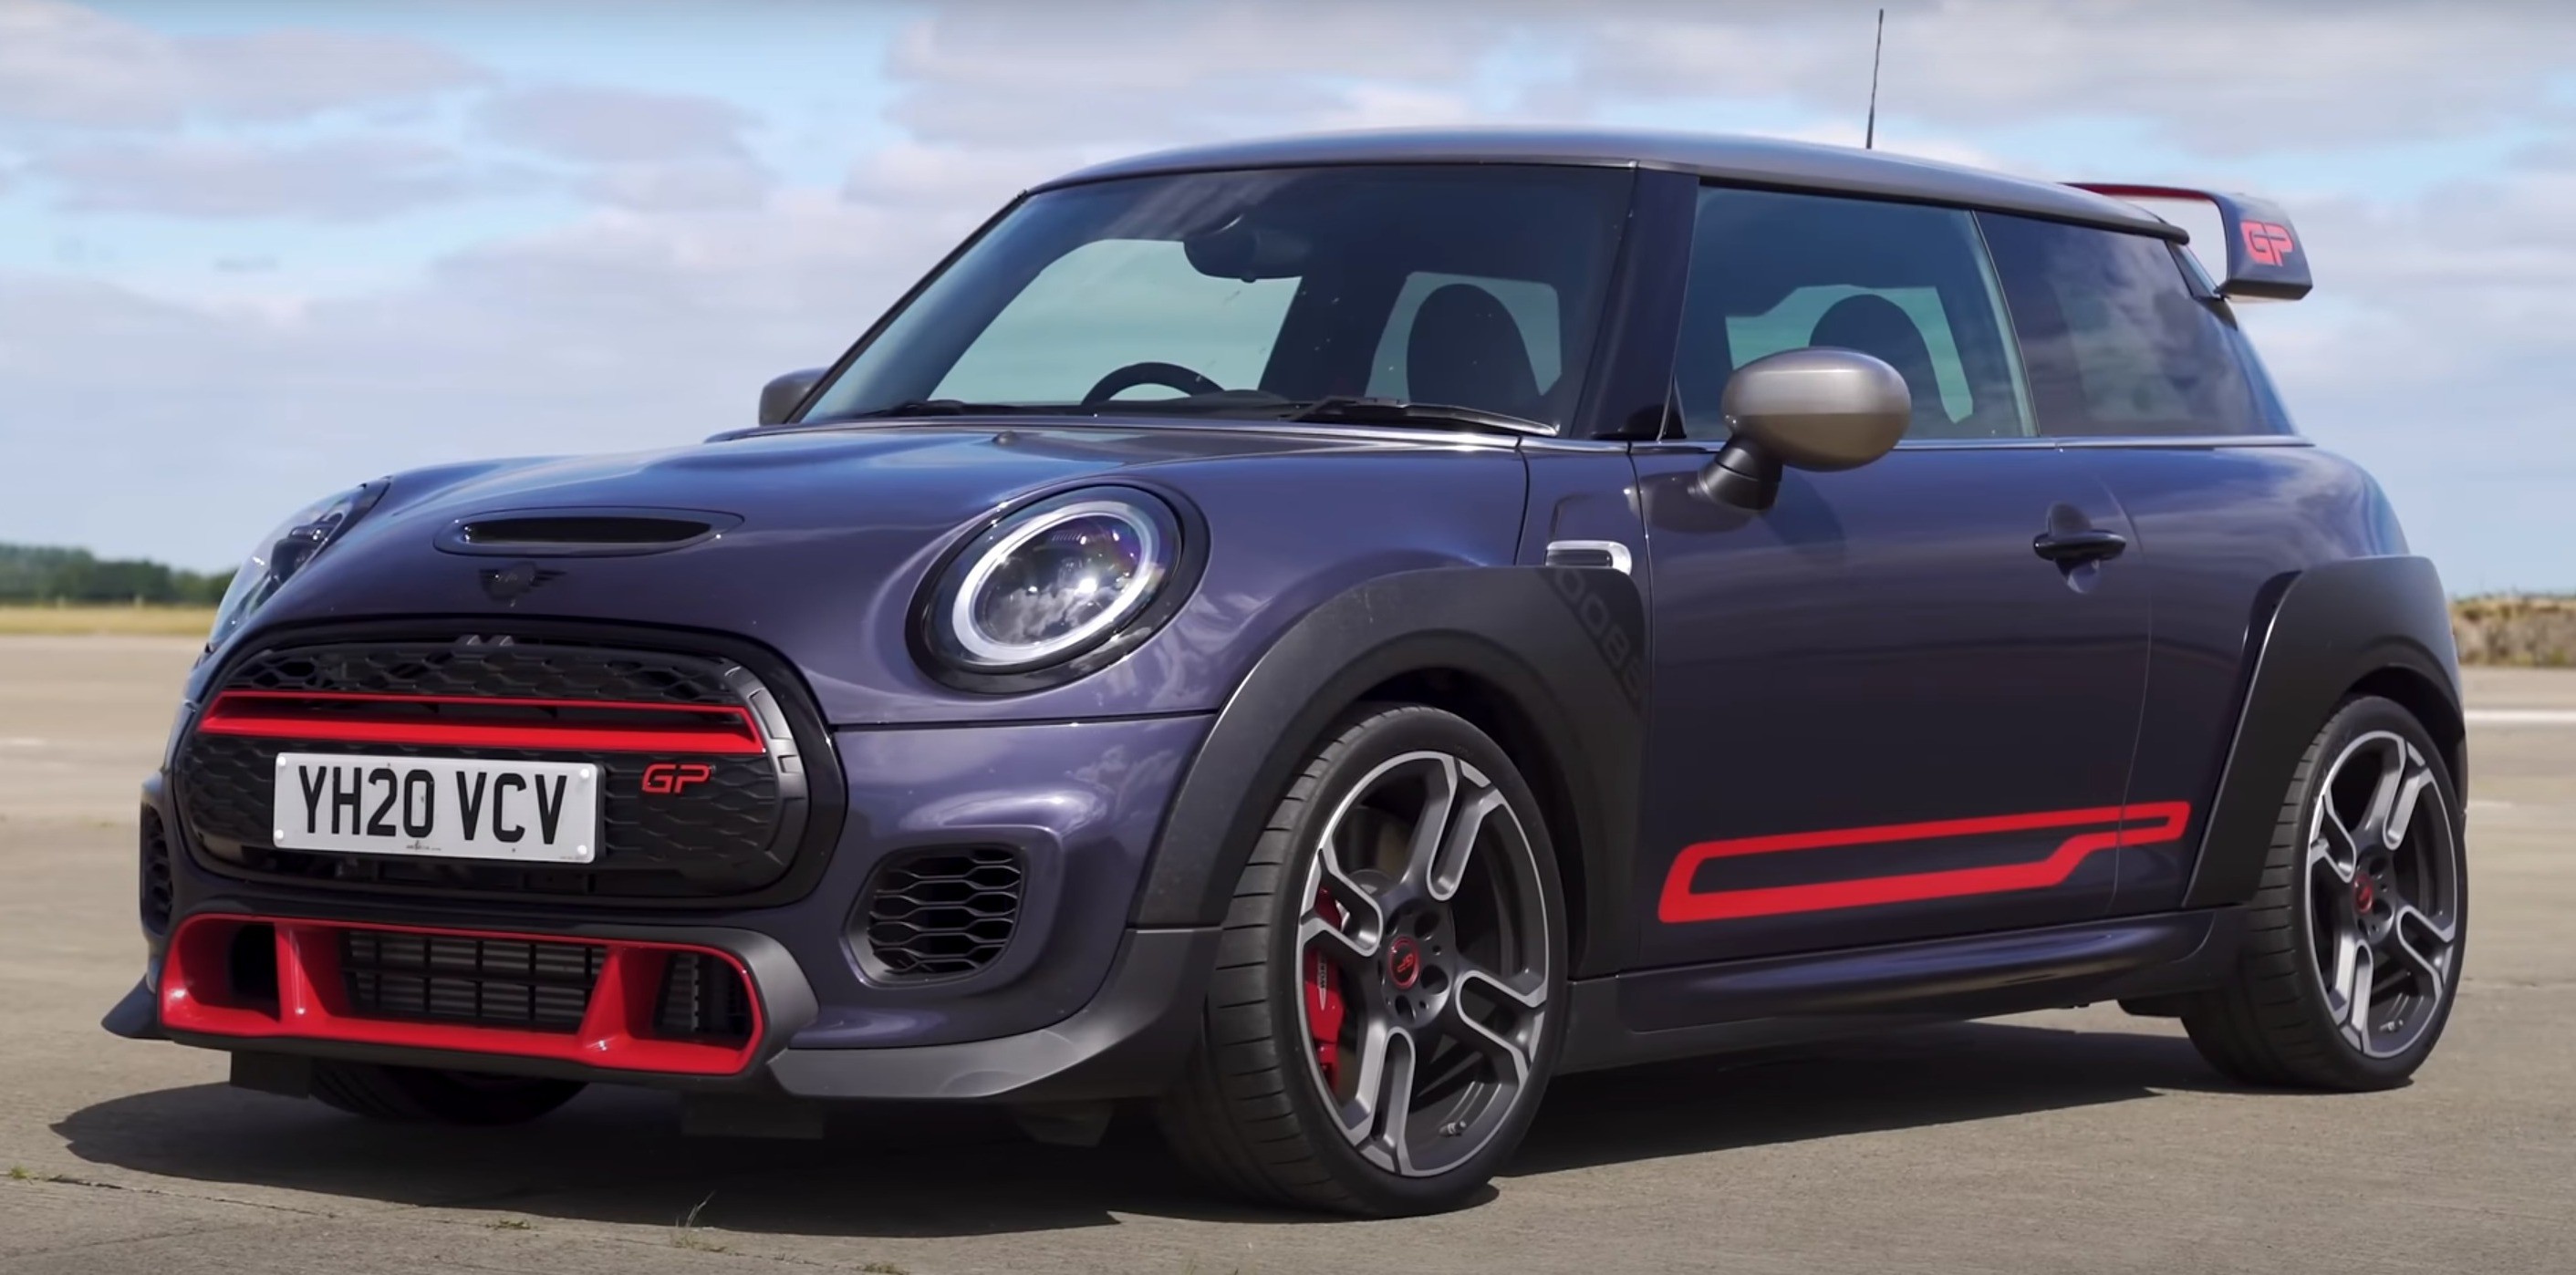 MINI JCW GP Demolishes Civic Type R, Tuned i30 N and Focus ST in Drag ...